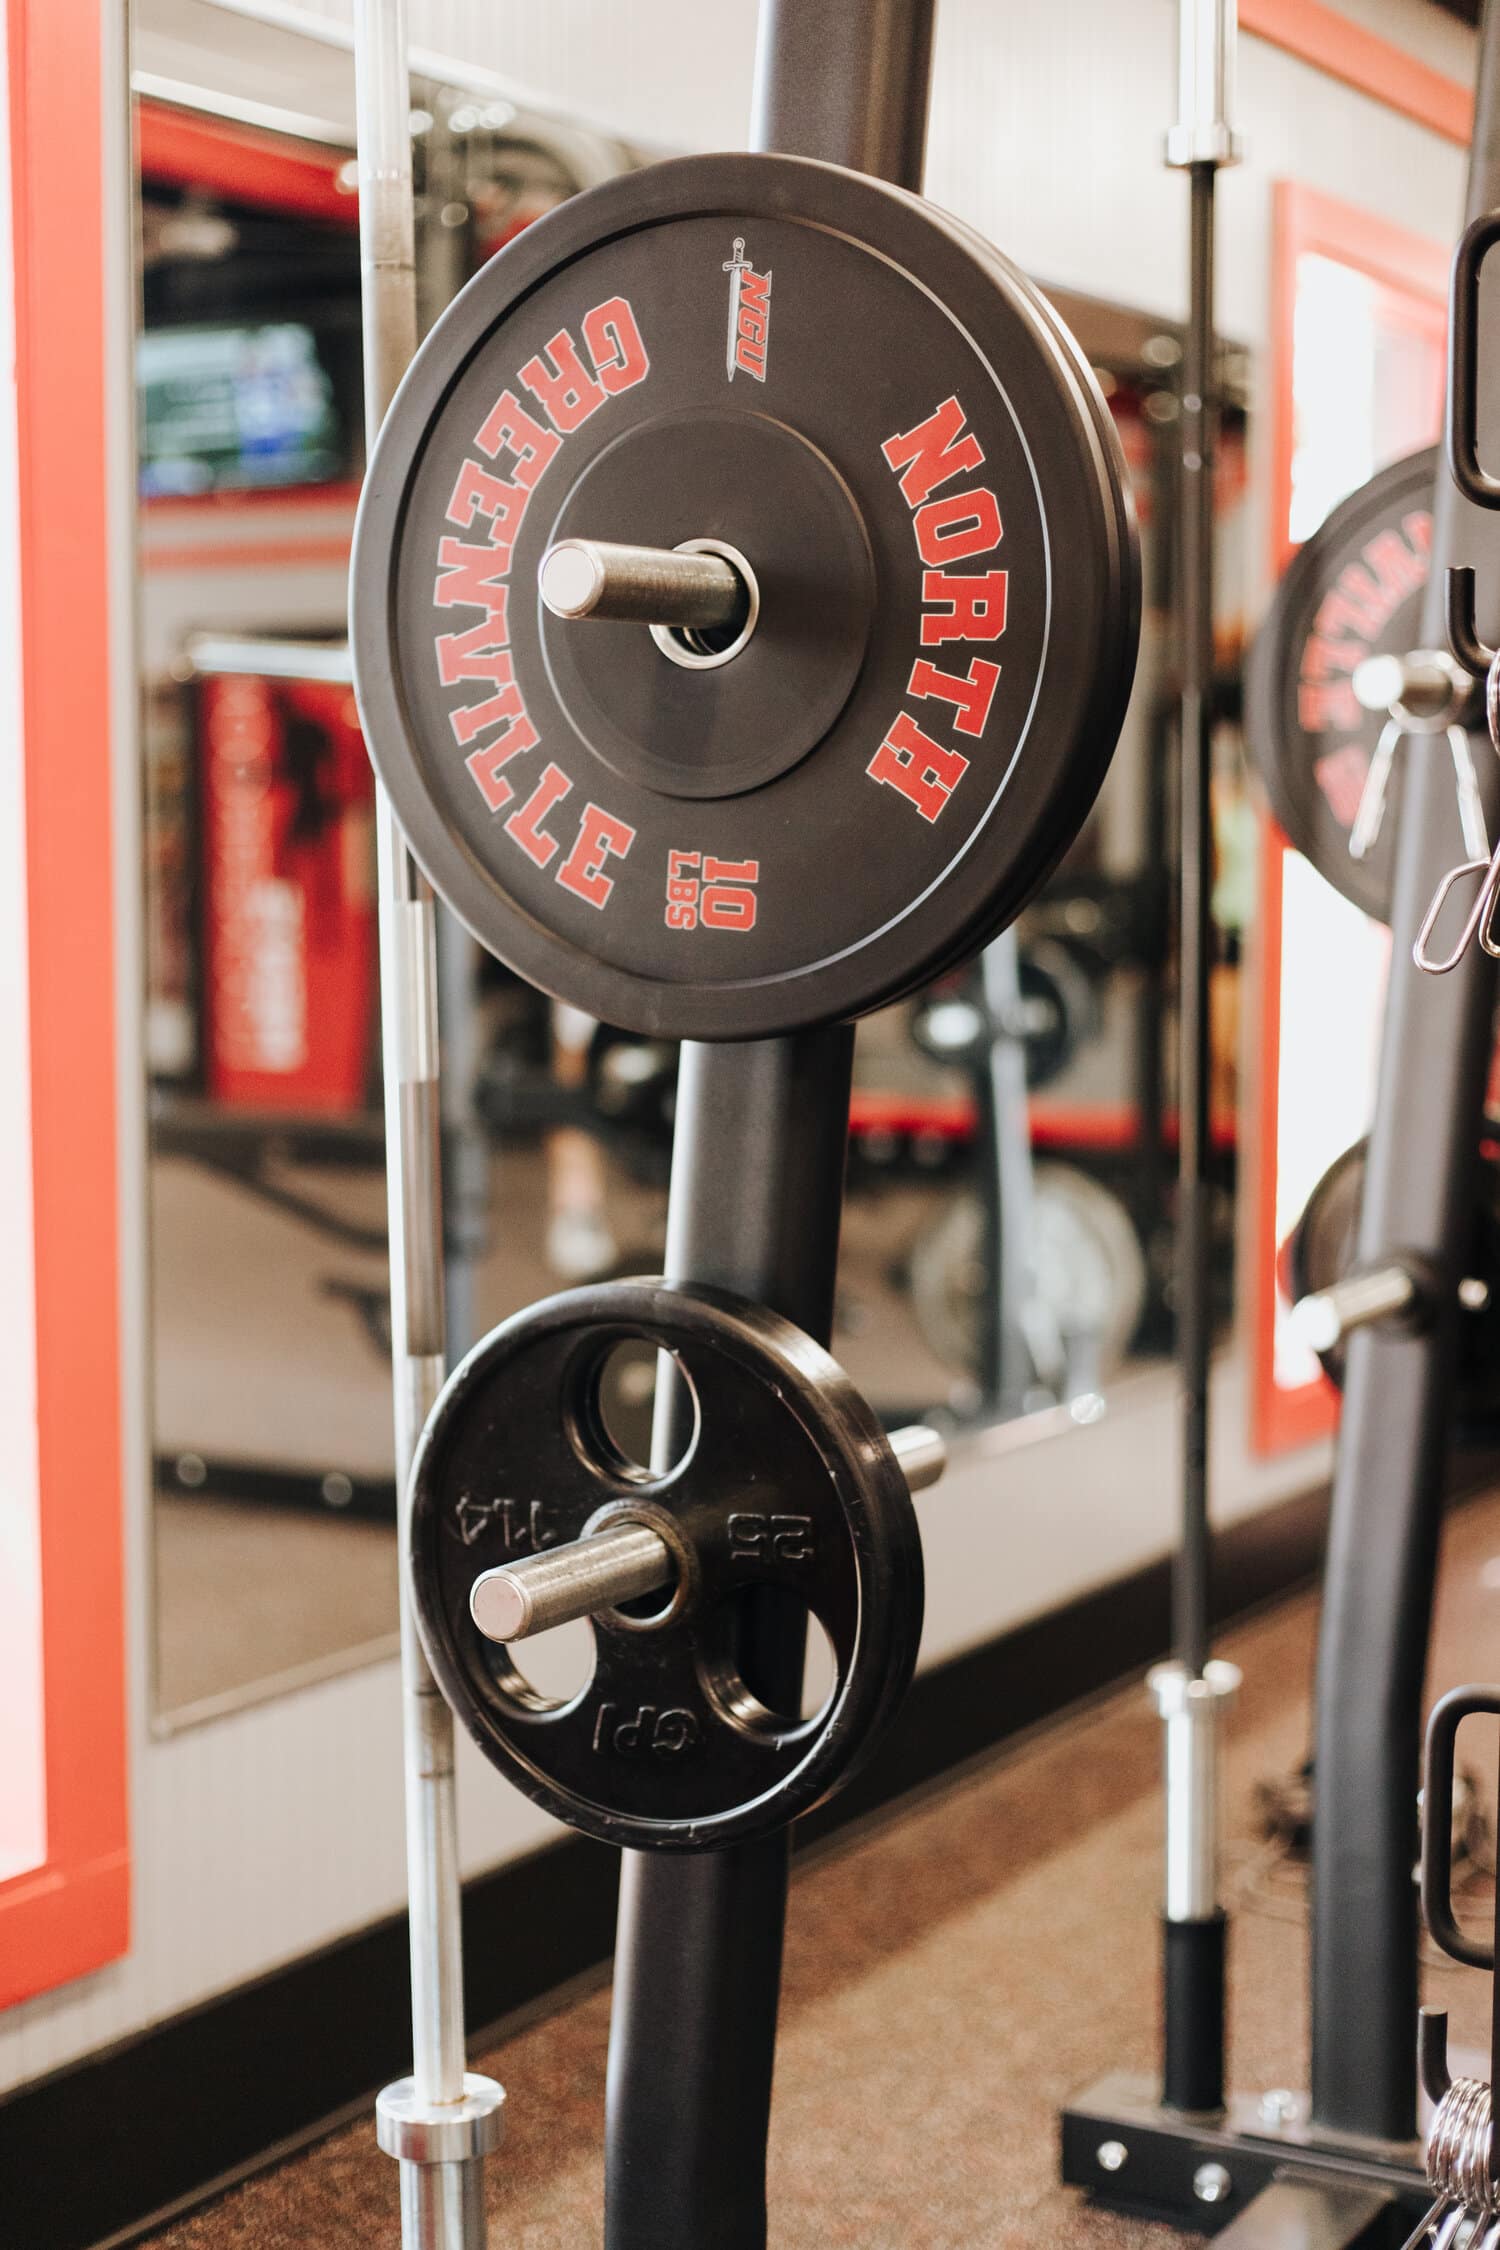 The fitness center received new free weights for gym-goers to lift with.